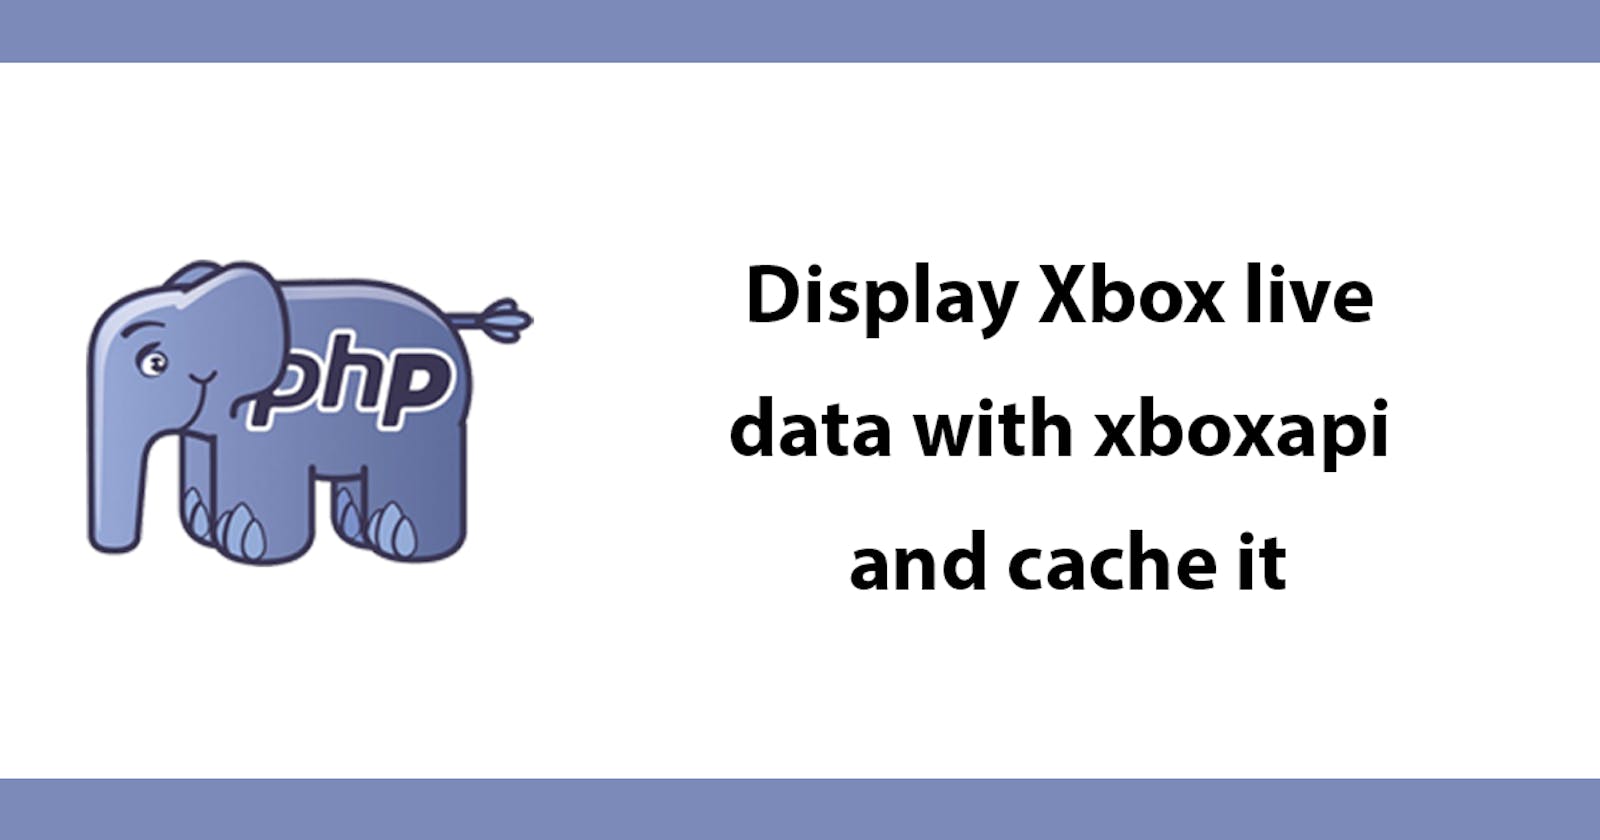 Display Xbox live data with xboxapi and cache it